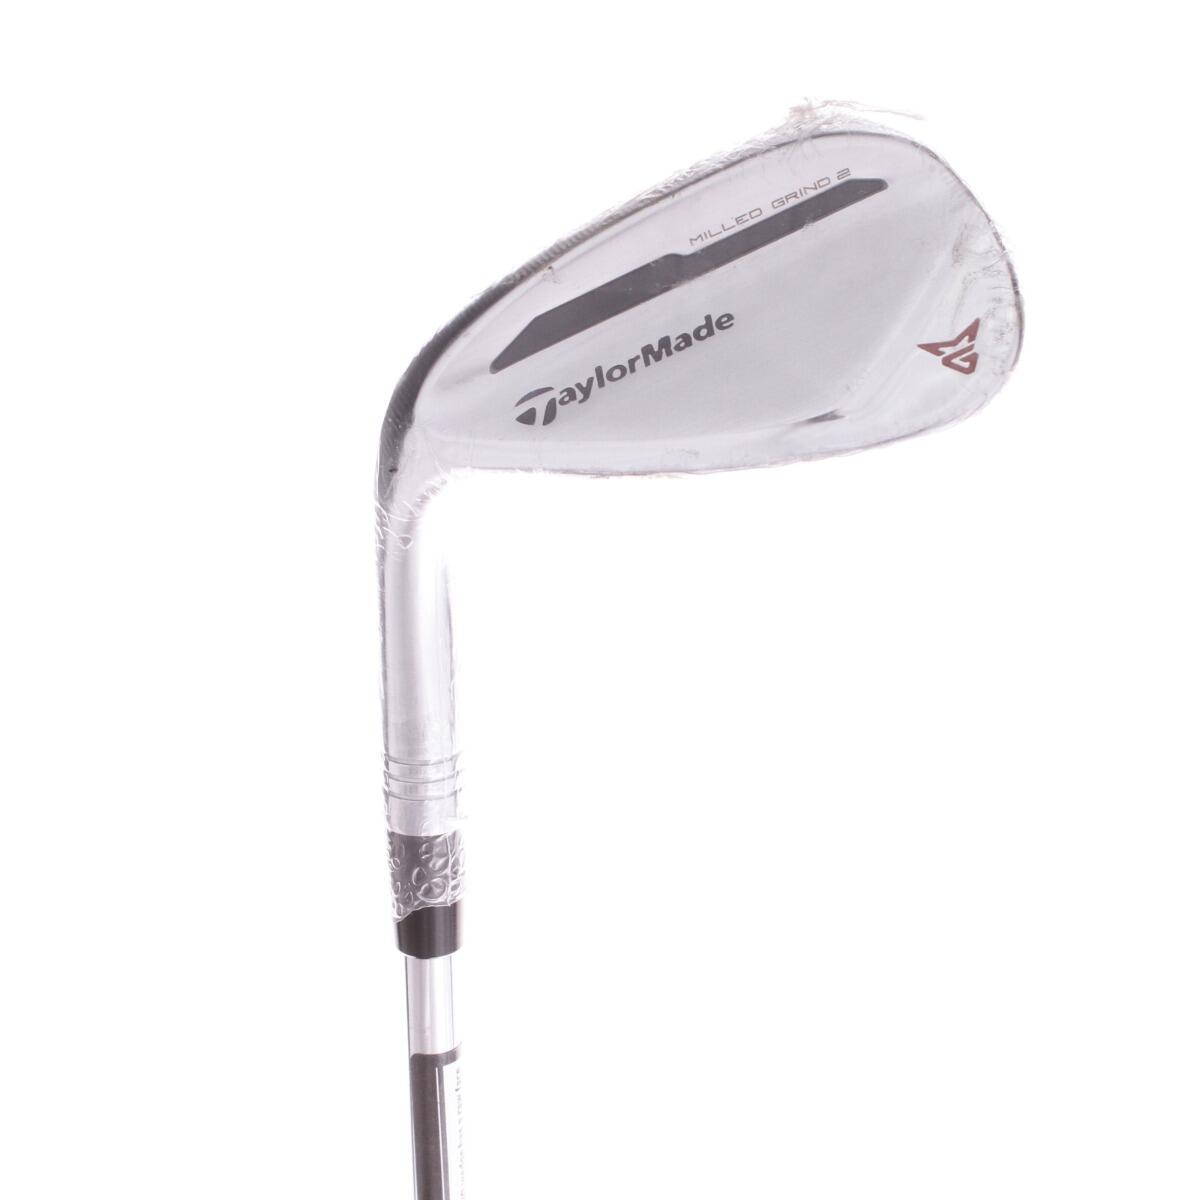 TAYLORMADE USED - Sand Wedge TaylorMade Milled Grind 2 56* Stiff Flex Left Handed - GRADE A